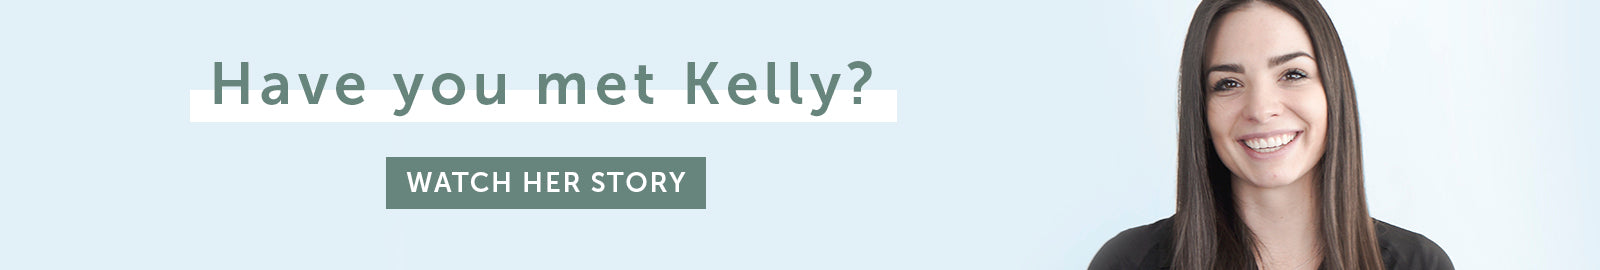 Have you met Kelly? Watch her story.